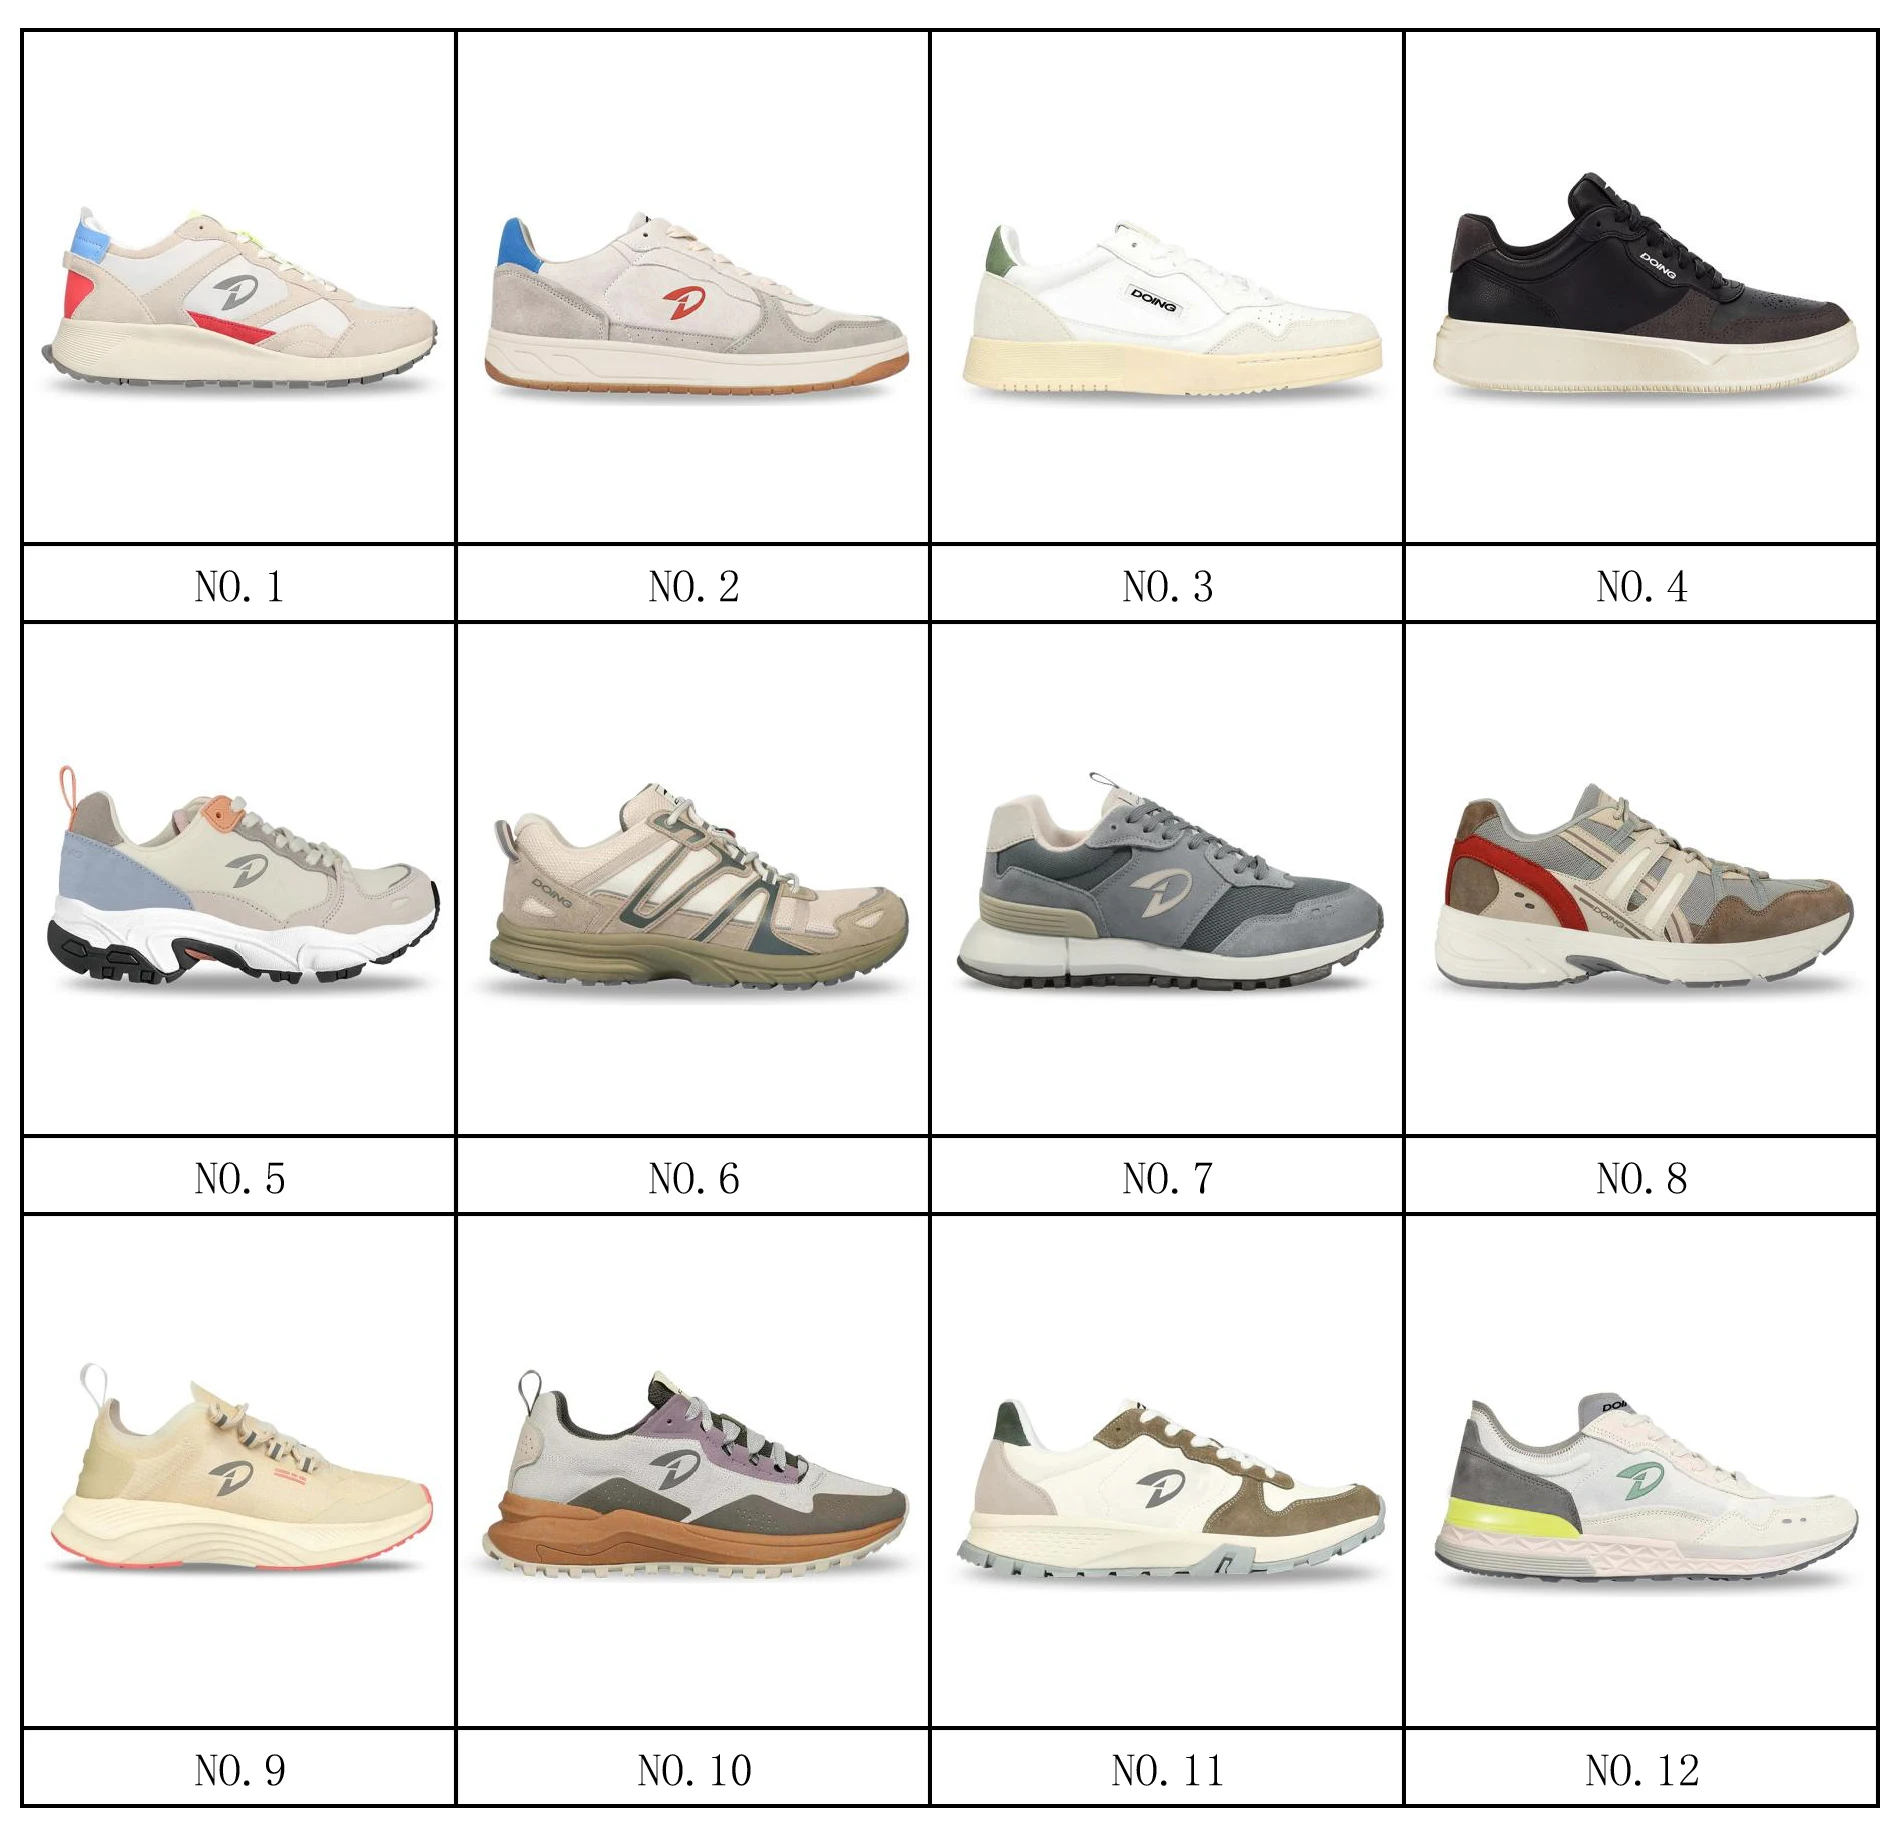 China Manufacturer's Design Your Own Brand Simple New Style Men's Athletic Breathable Fabric Platform Running Sport Shoes